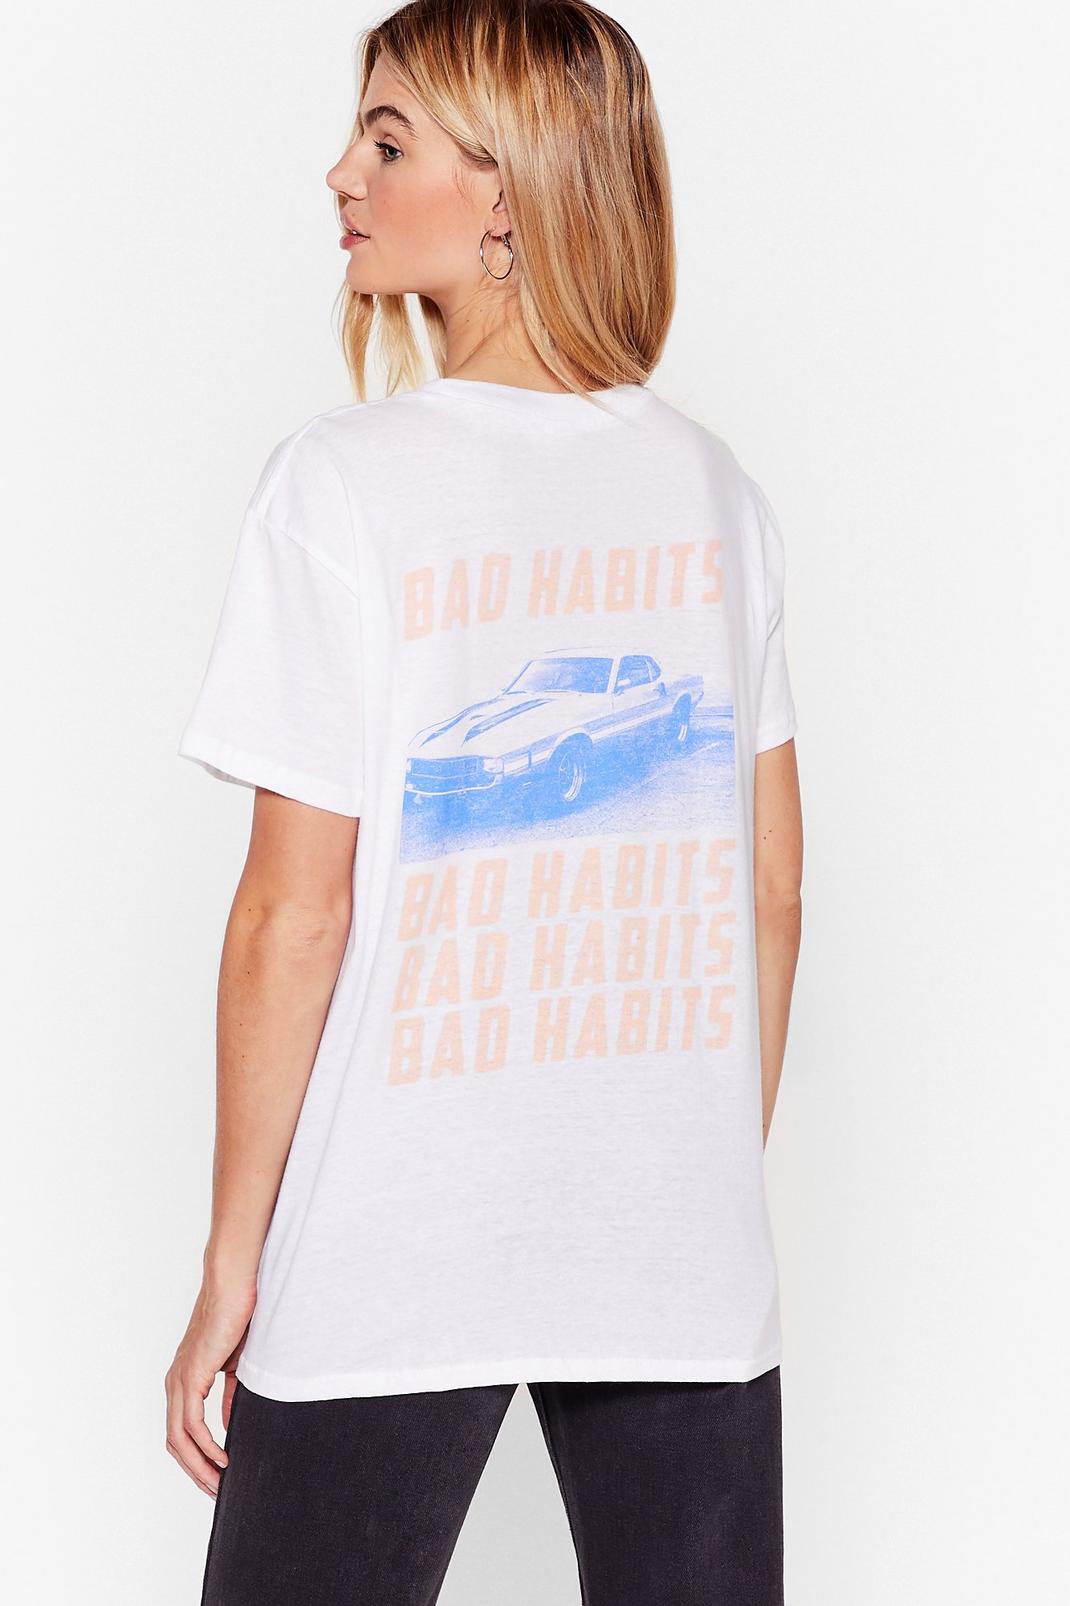 Bad Habits Relaxed Graphic Tee image number 1